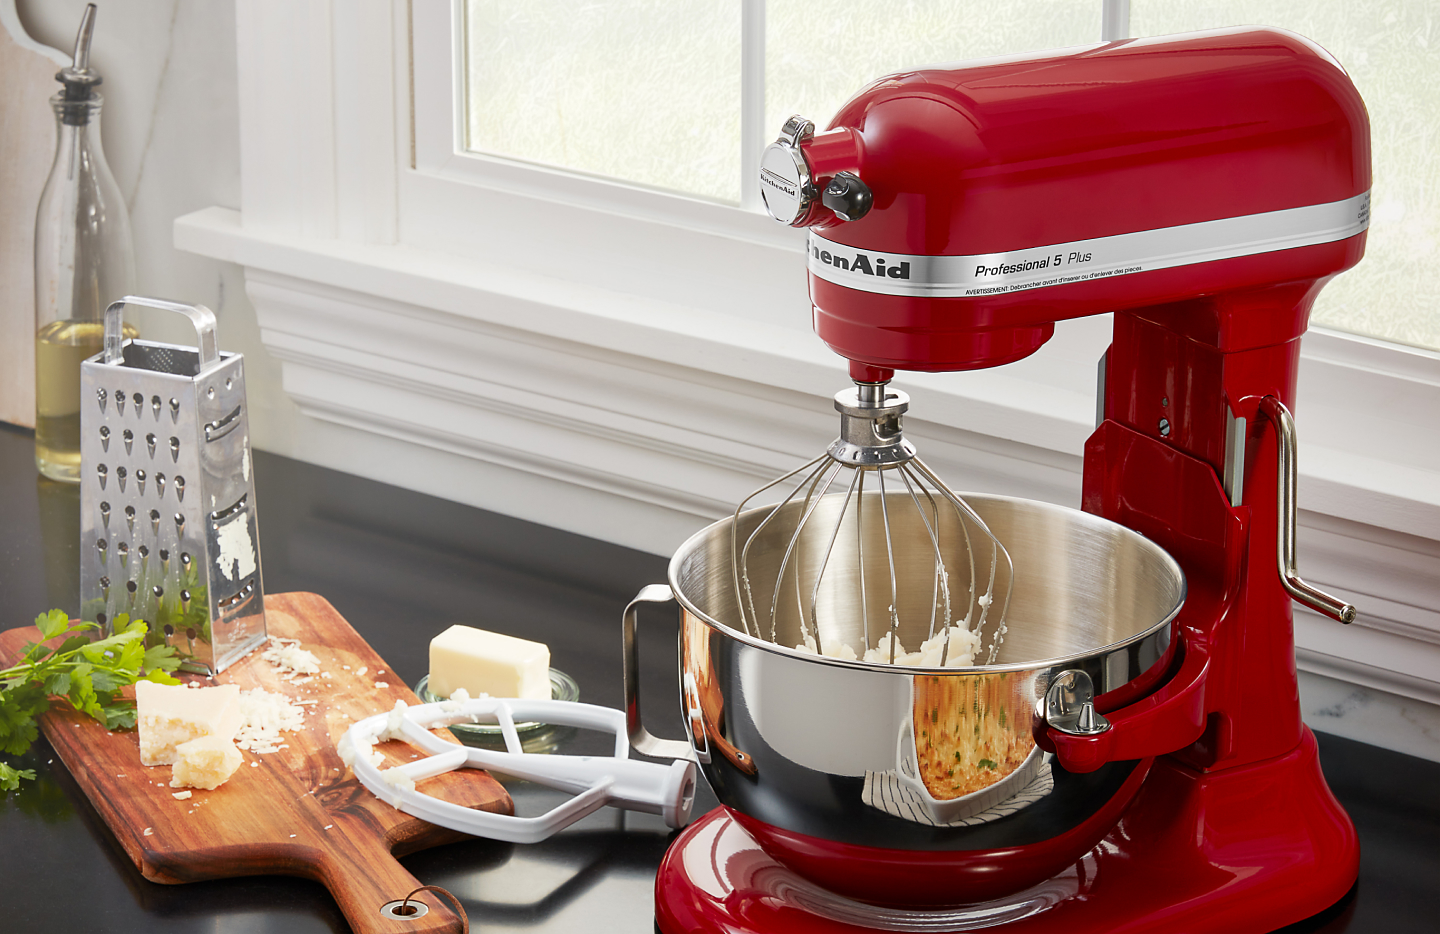 Red KitchenAid® stand mixer next to grated cheese and butter